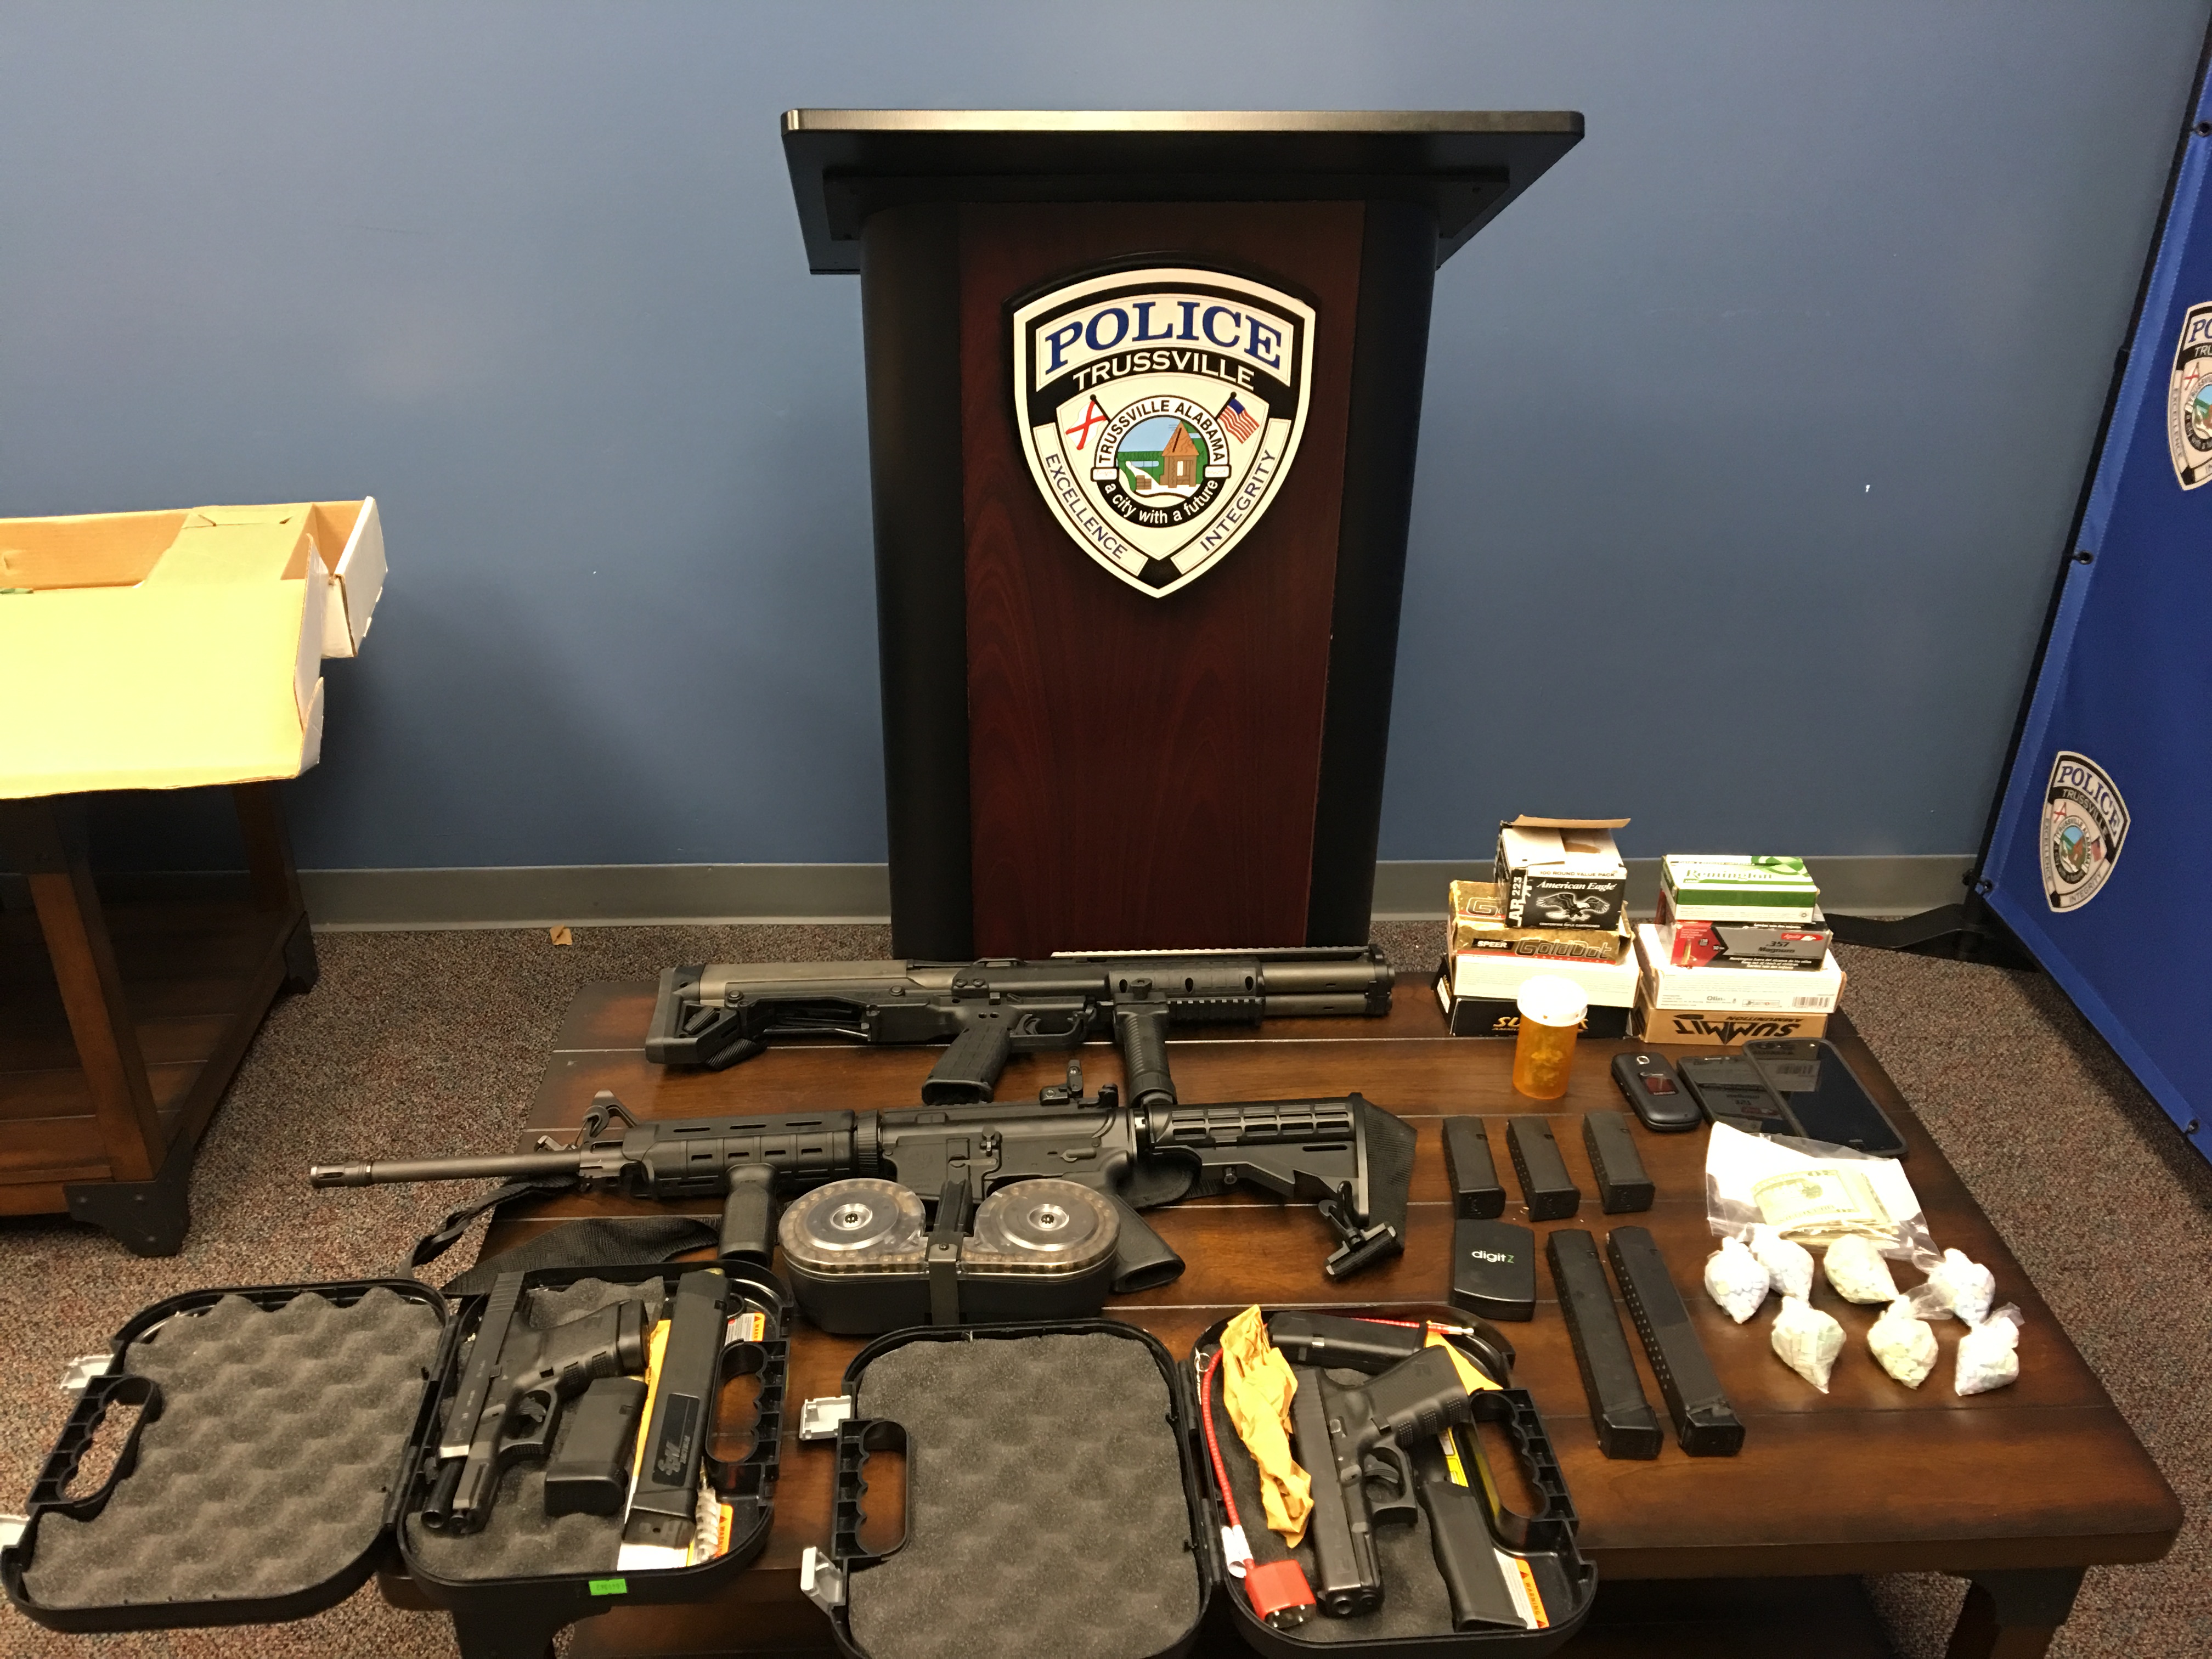 Firearms, 700 ecstasy tablets seized during Trussville search warrant